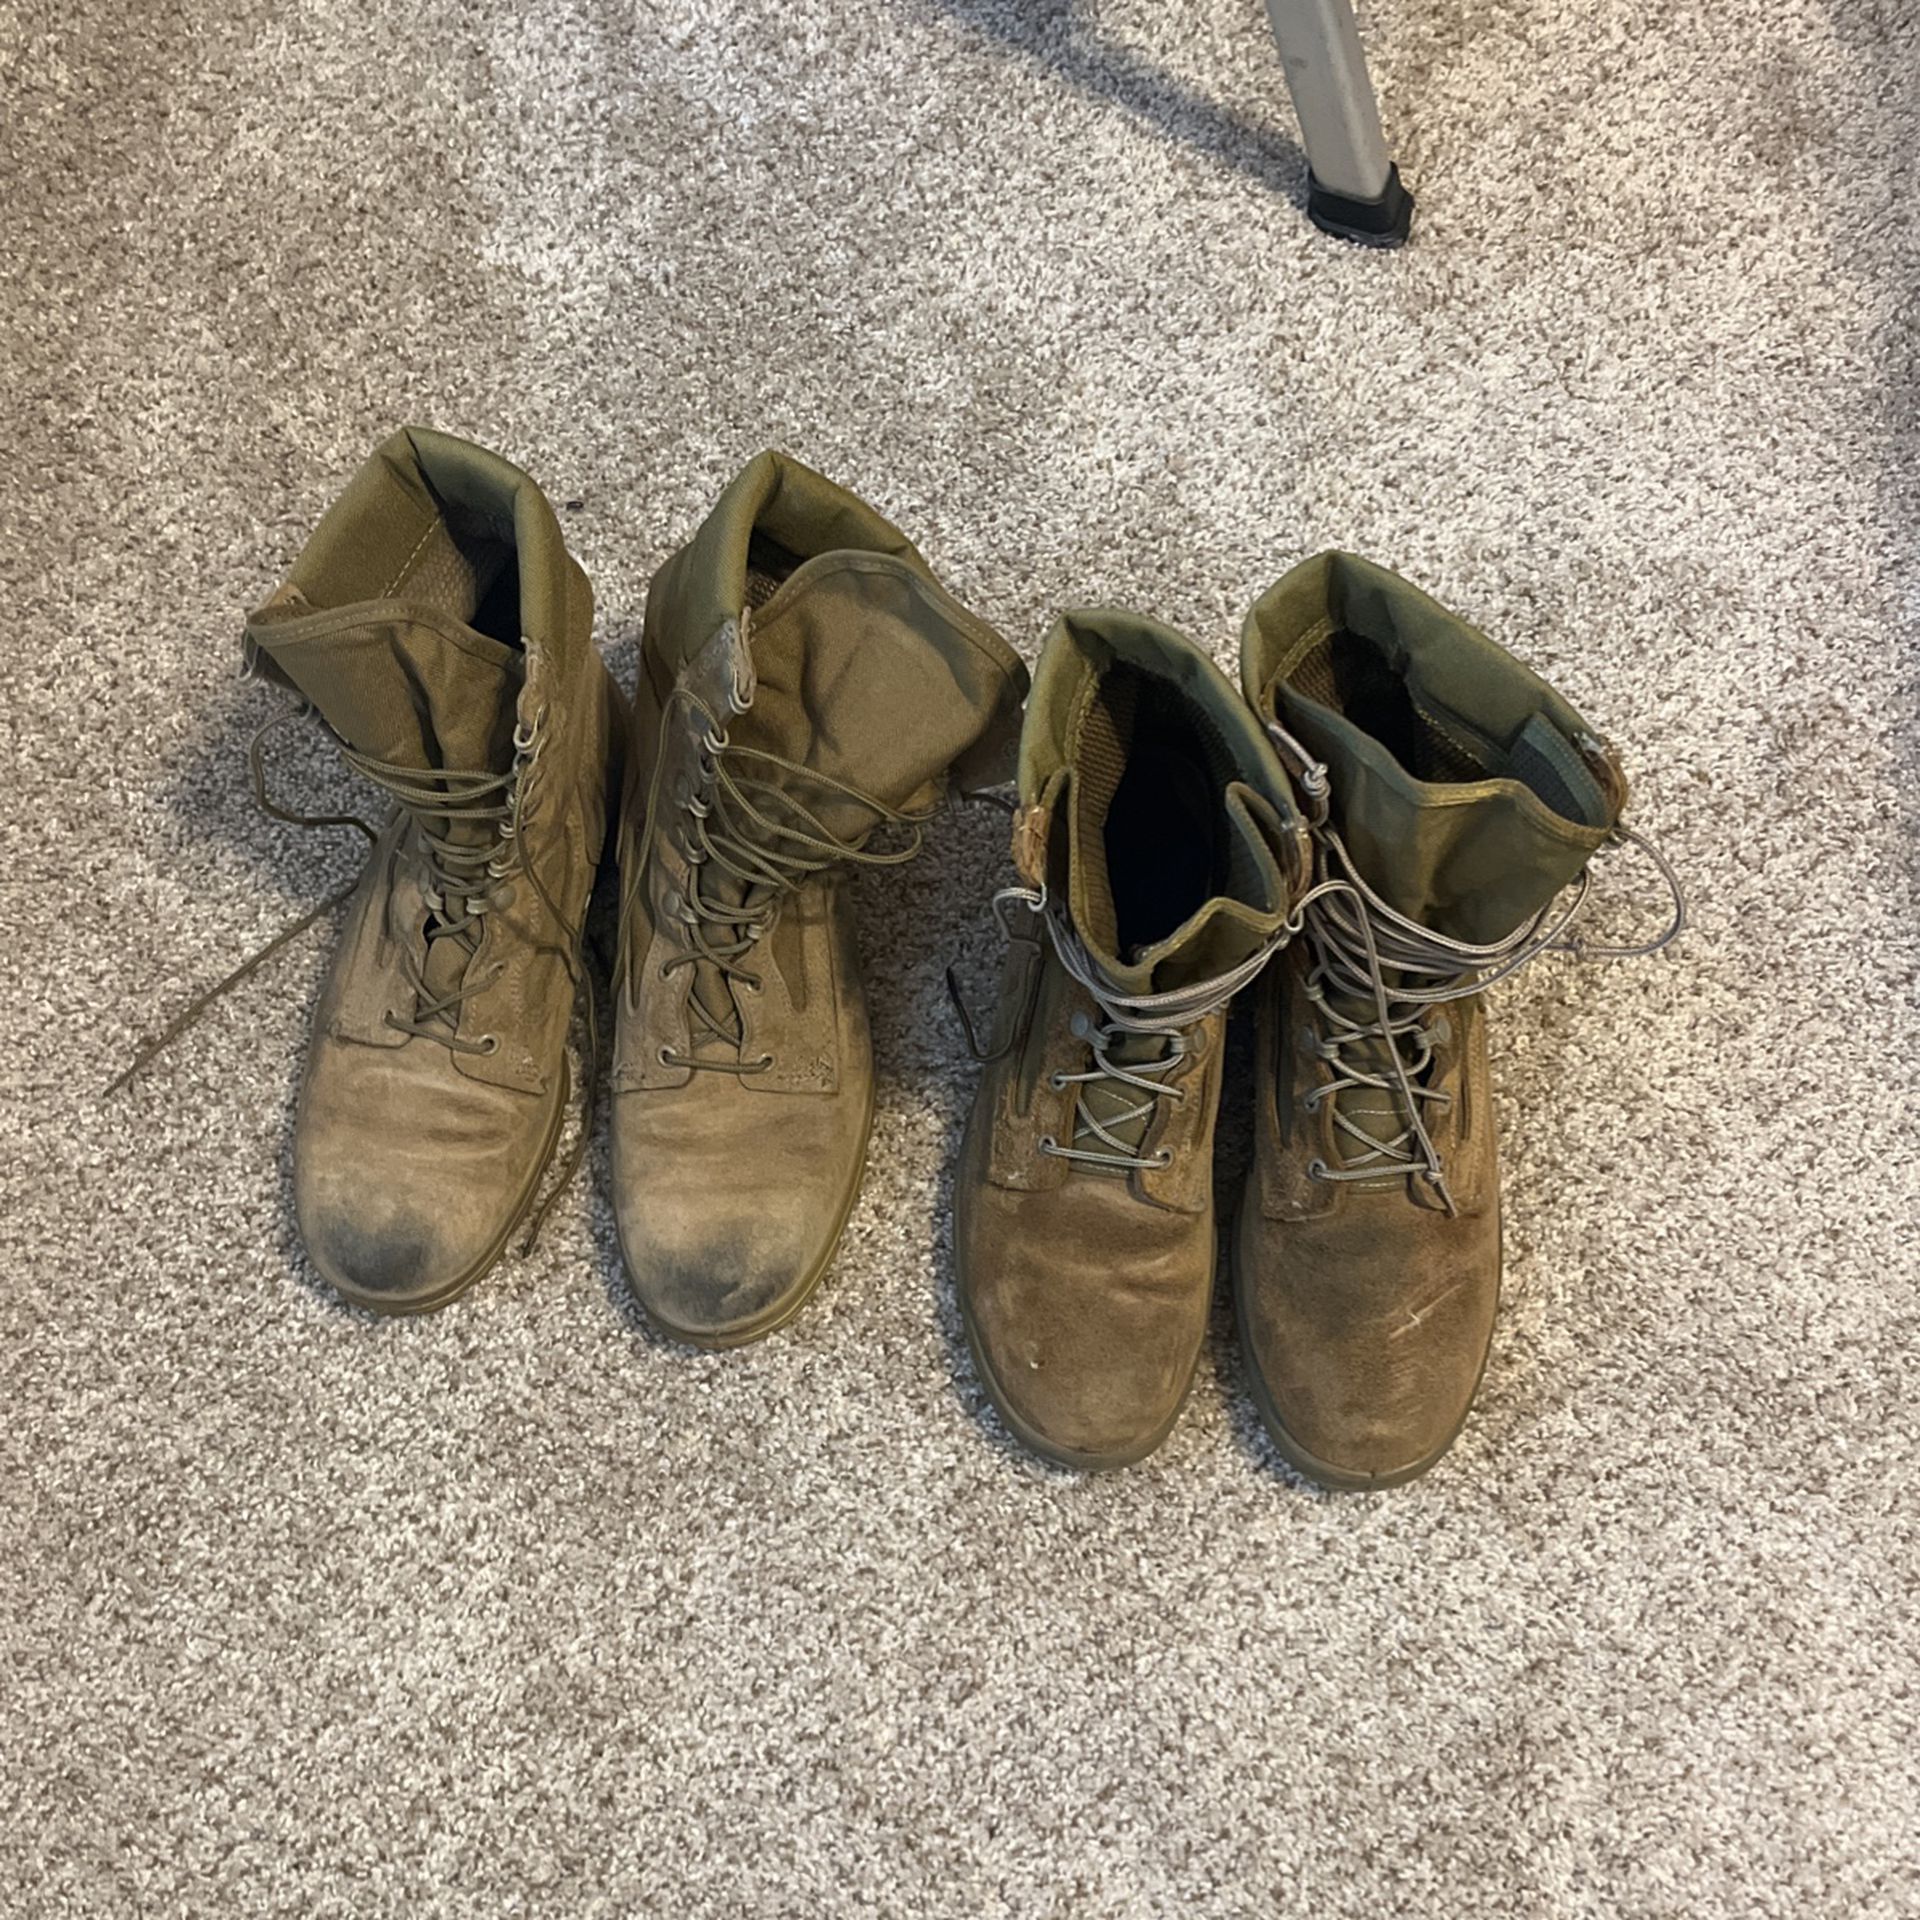 BATES Military Boots For Sale (MUST TAKE BOTH)